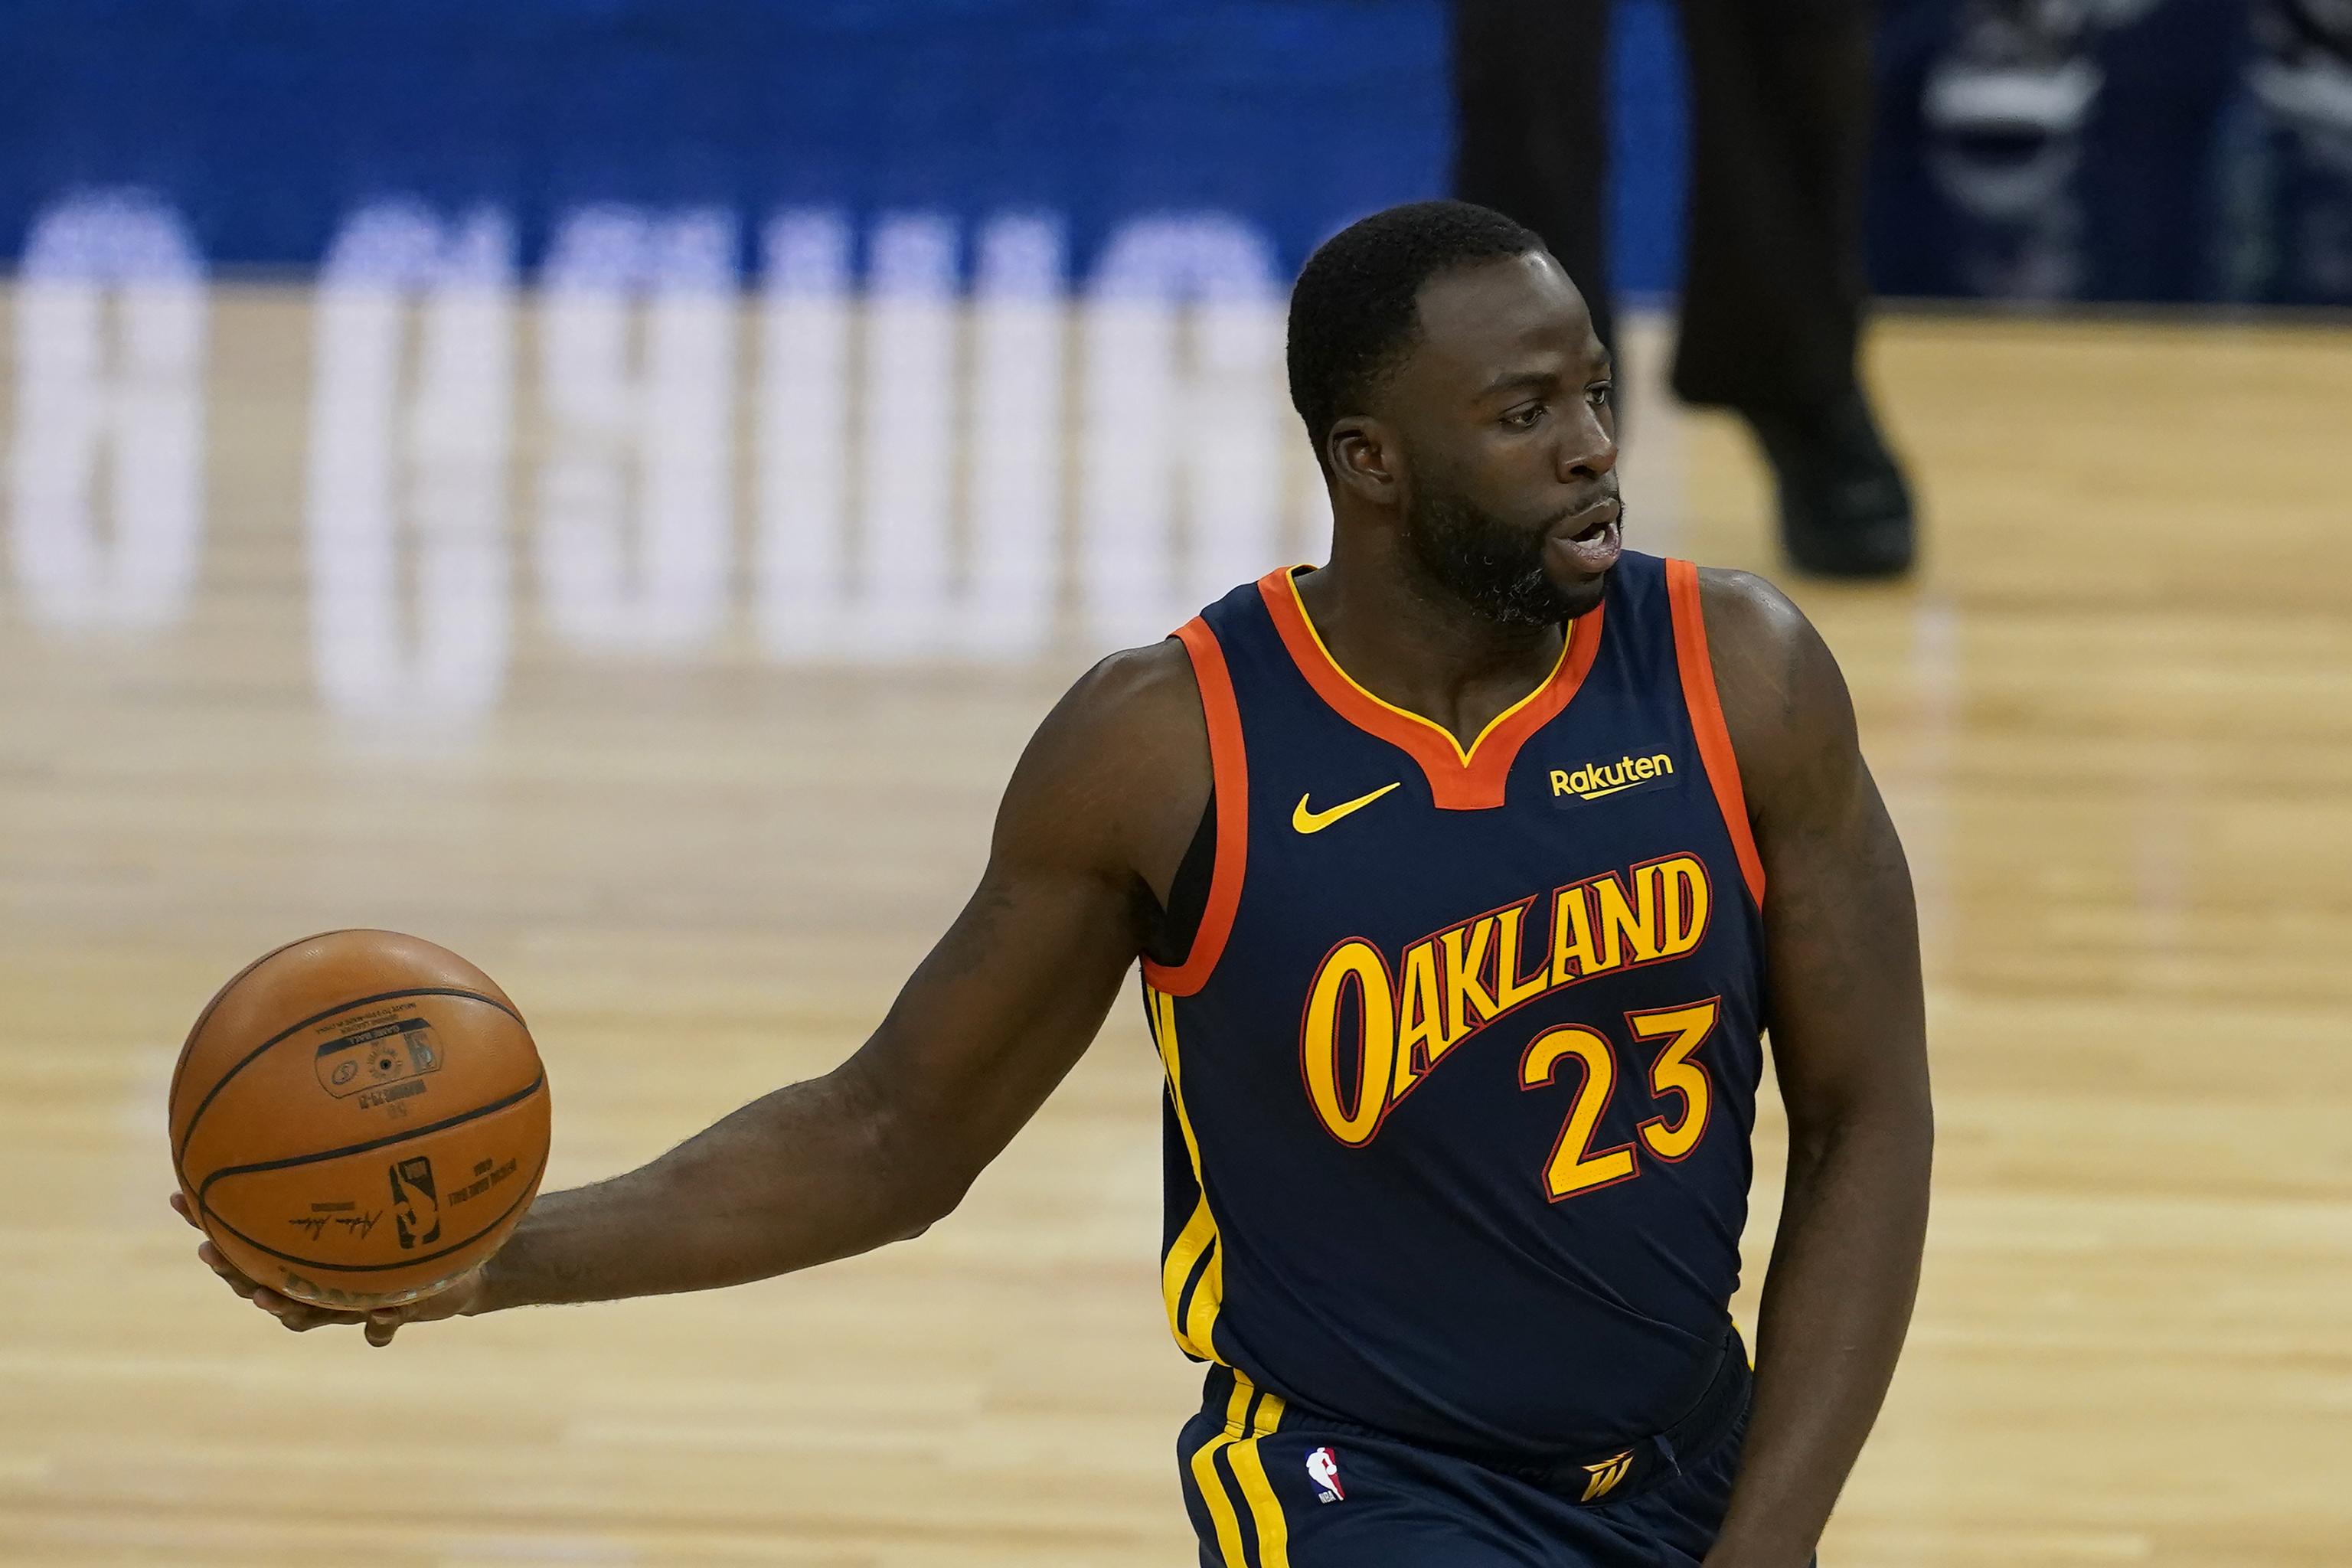 Draymond Green Bulls T For Andre Drummond To Be Mistreated Amid Trade Rumors Bleacher Report Latest News Videos And Highlights